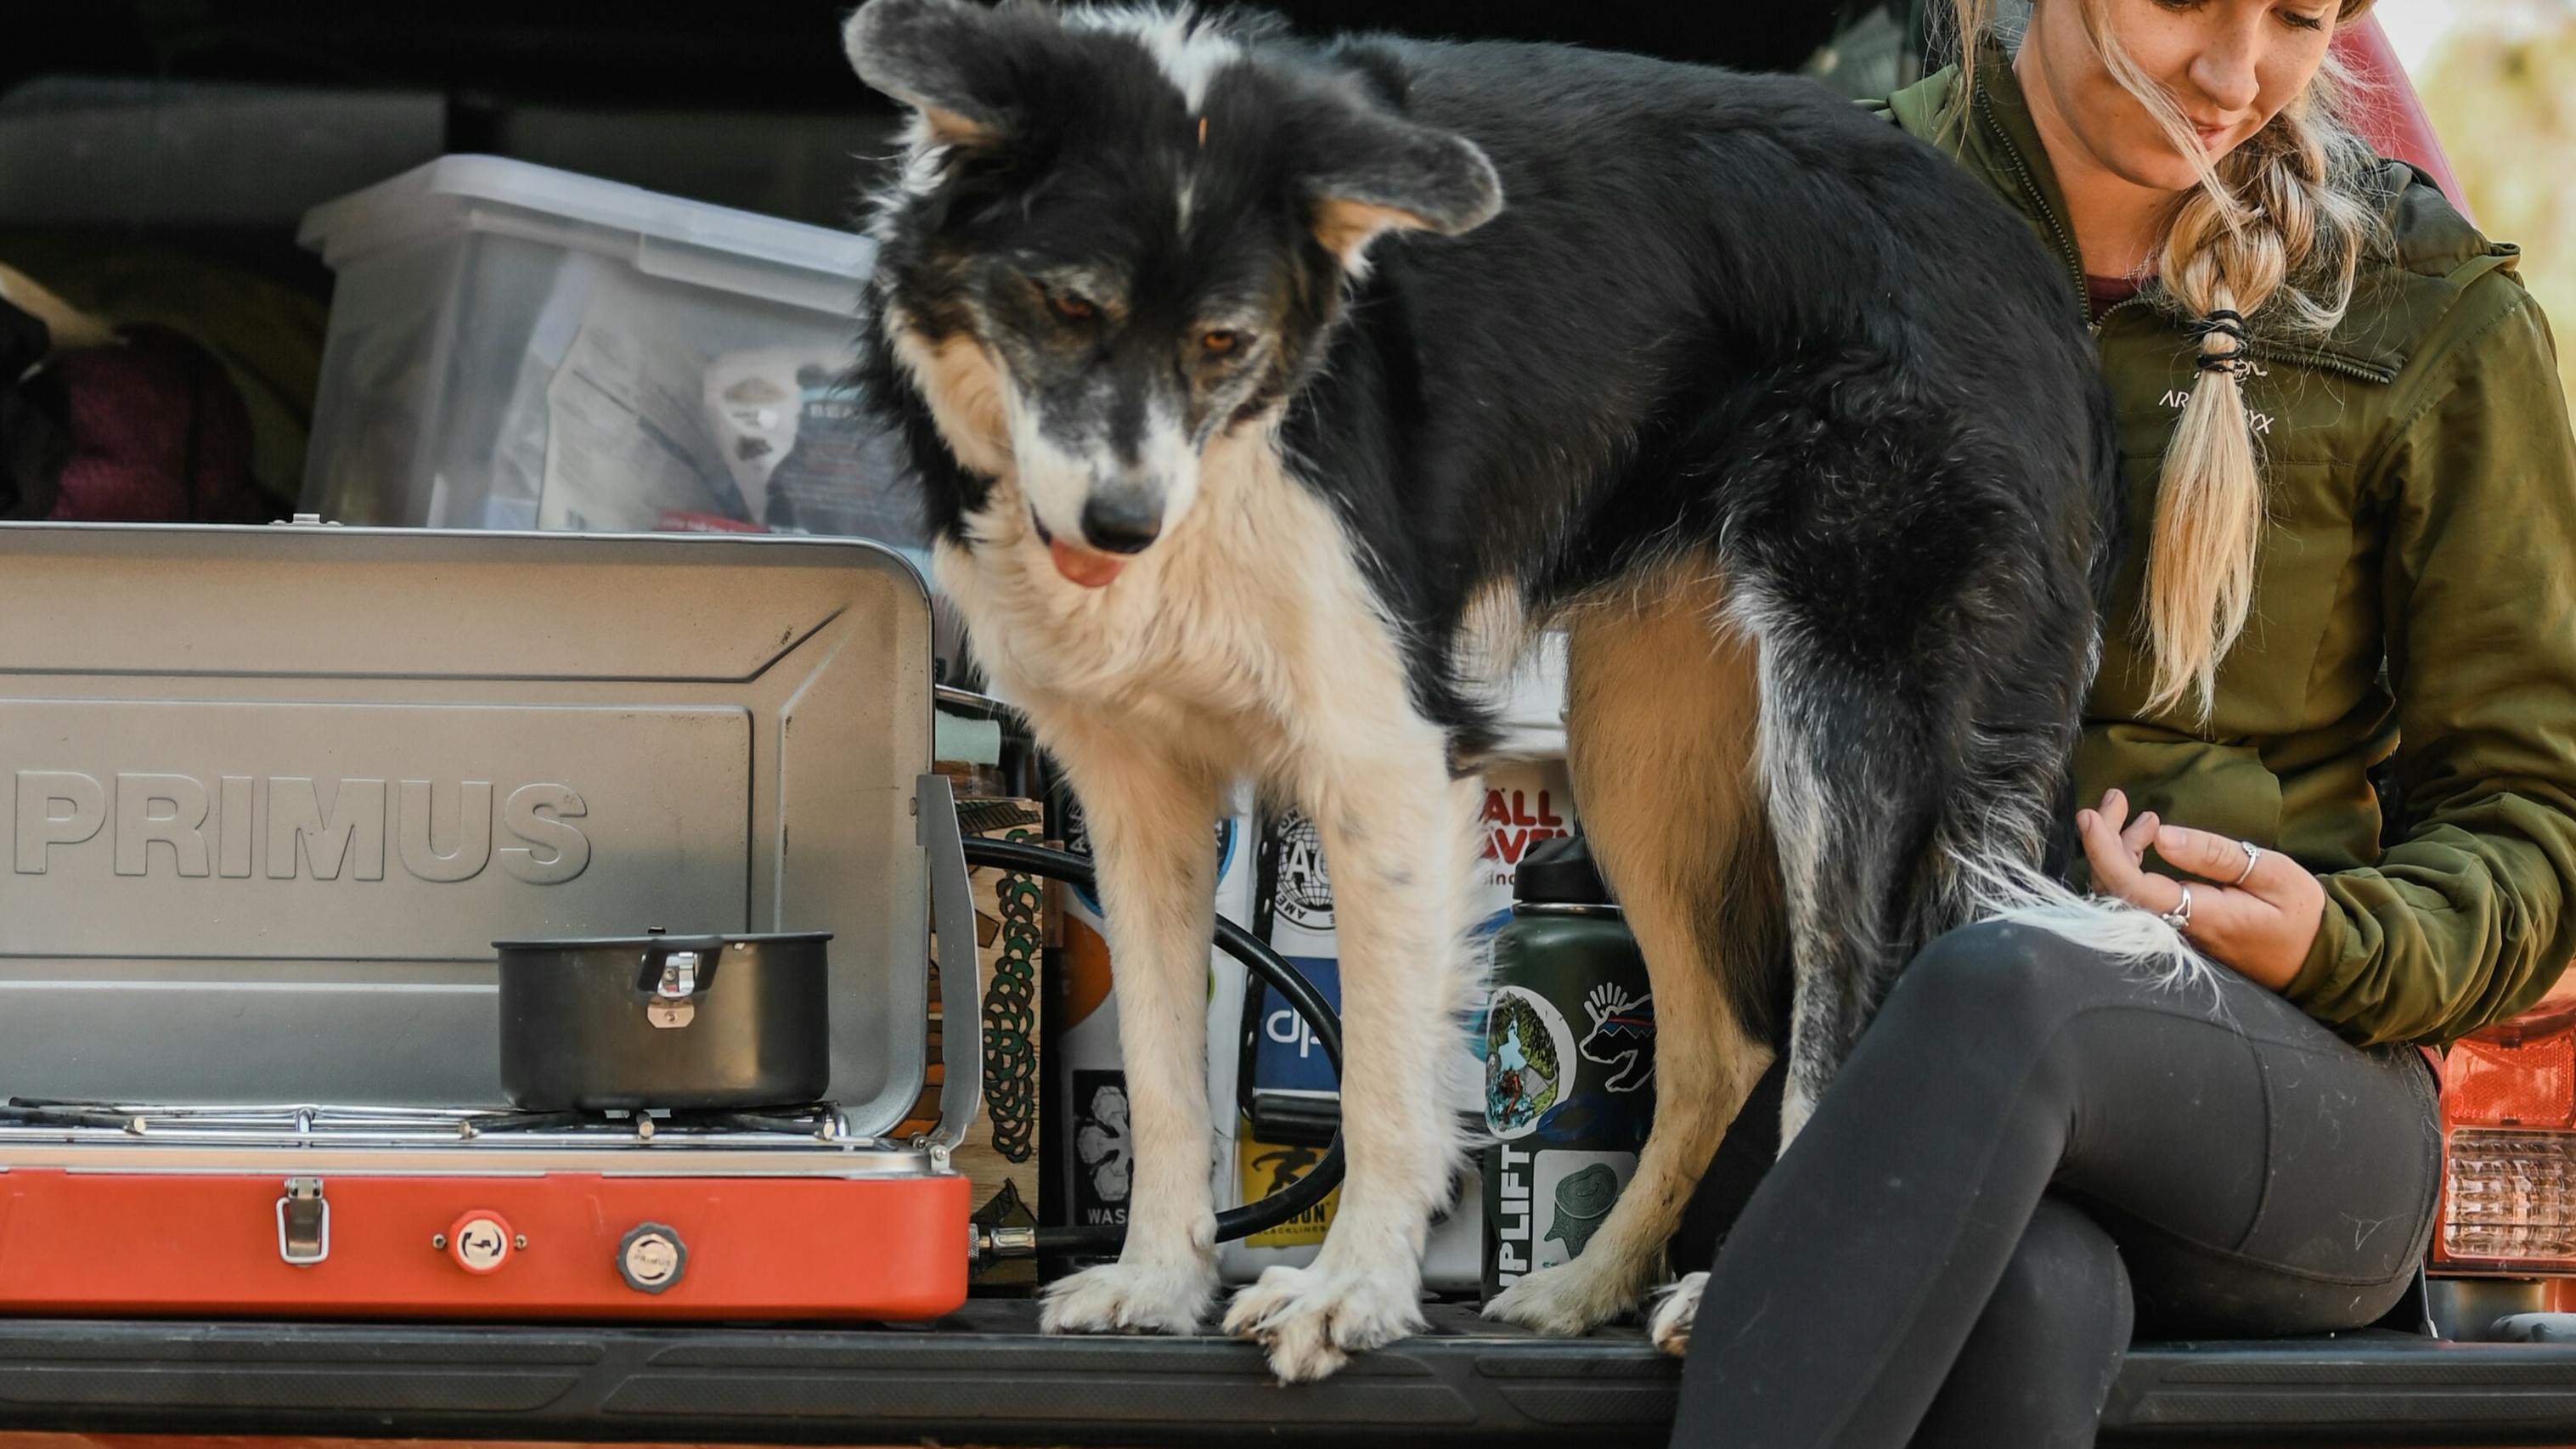 A stove, a dog, and a woman all sit on the tailgate of a truck. There is a pot on the stove.